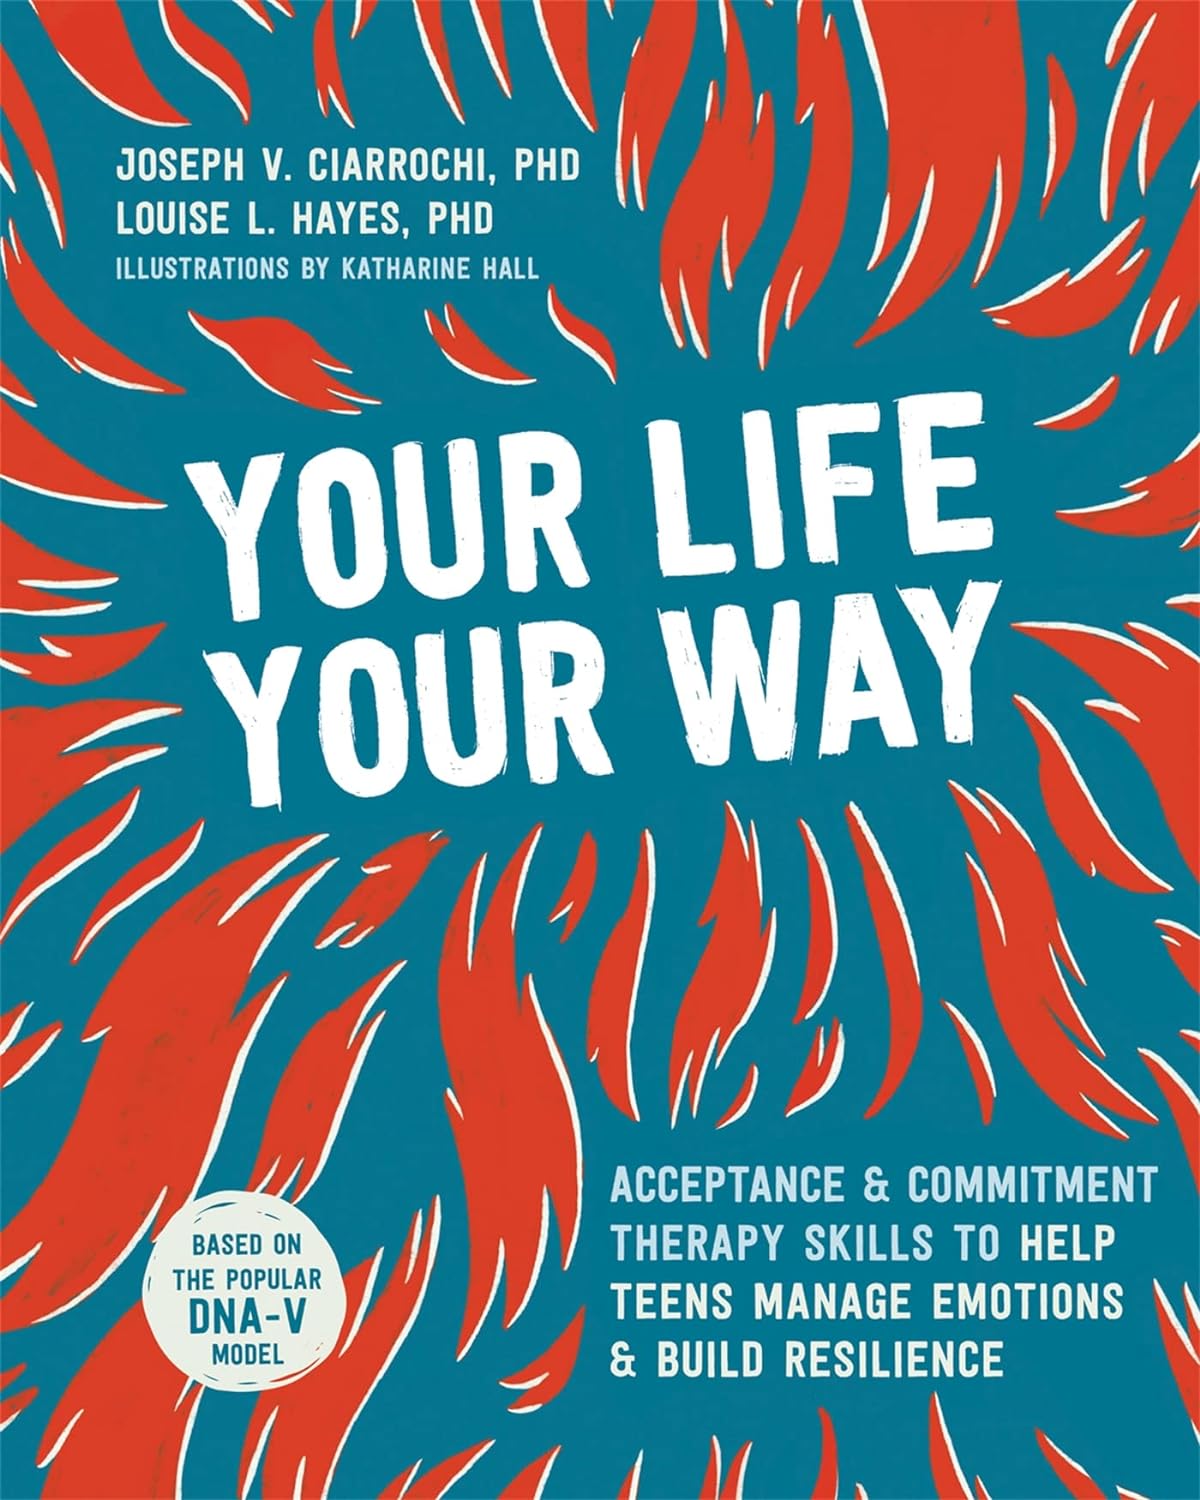 Cover image for "Your Life, Your Way"